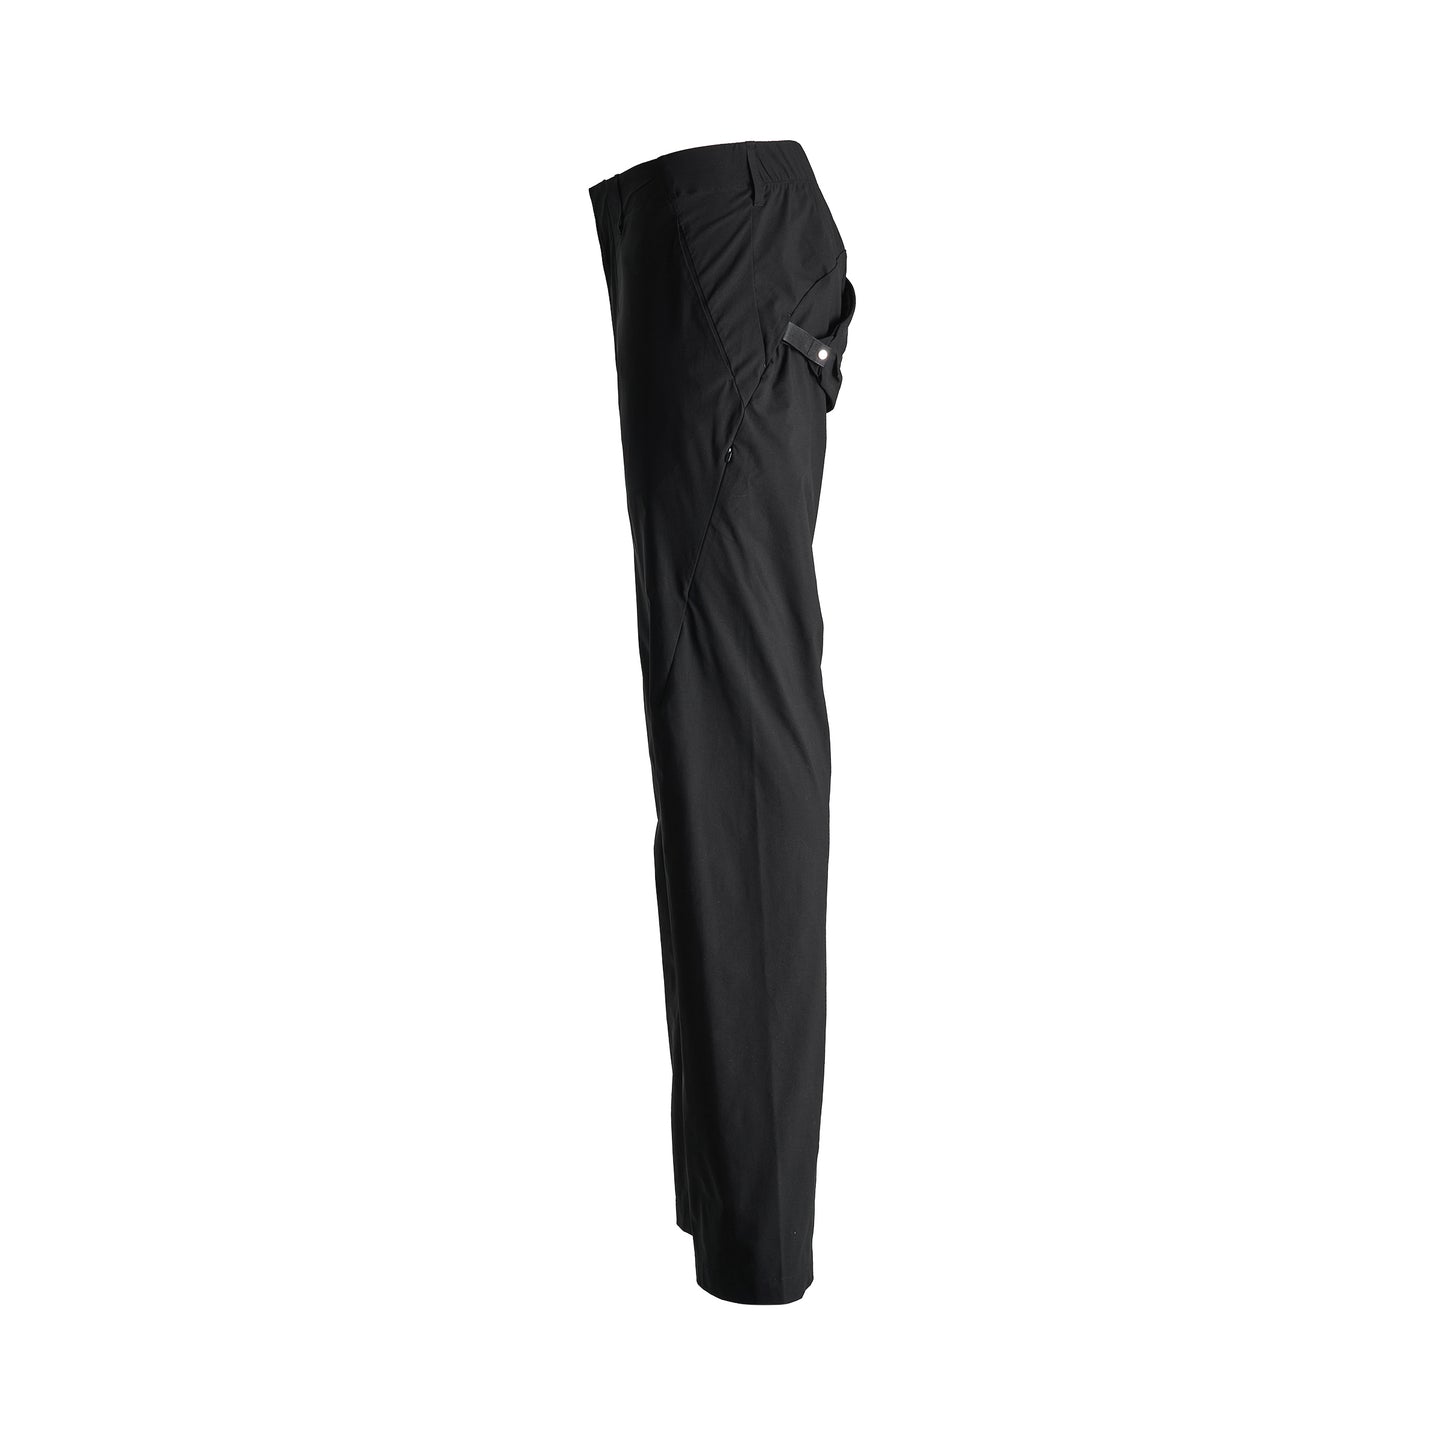 6.0 Technical Pants (Right) in Black